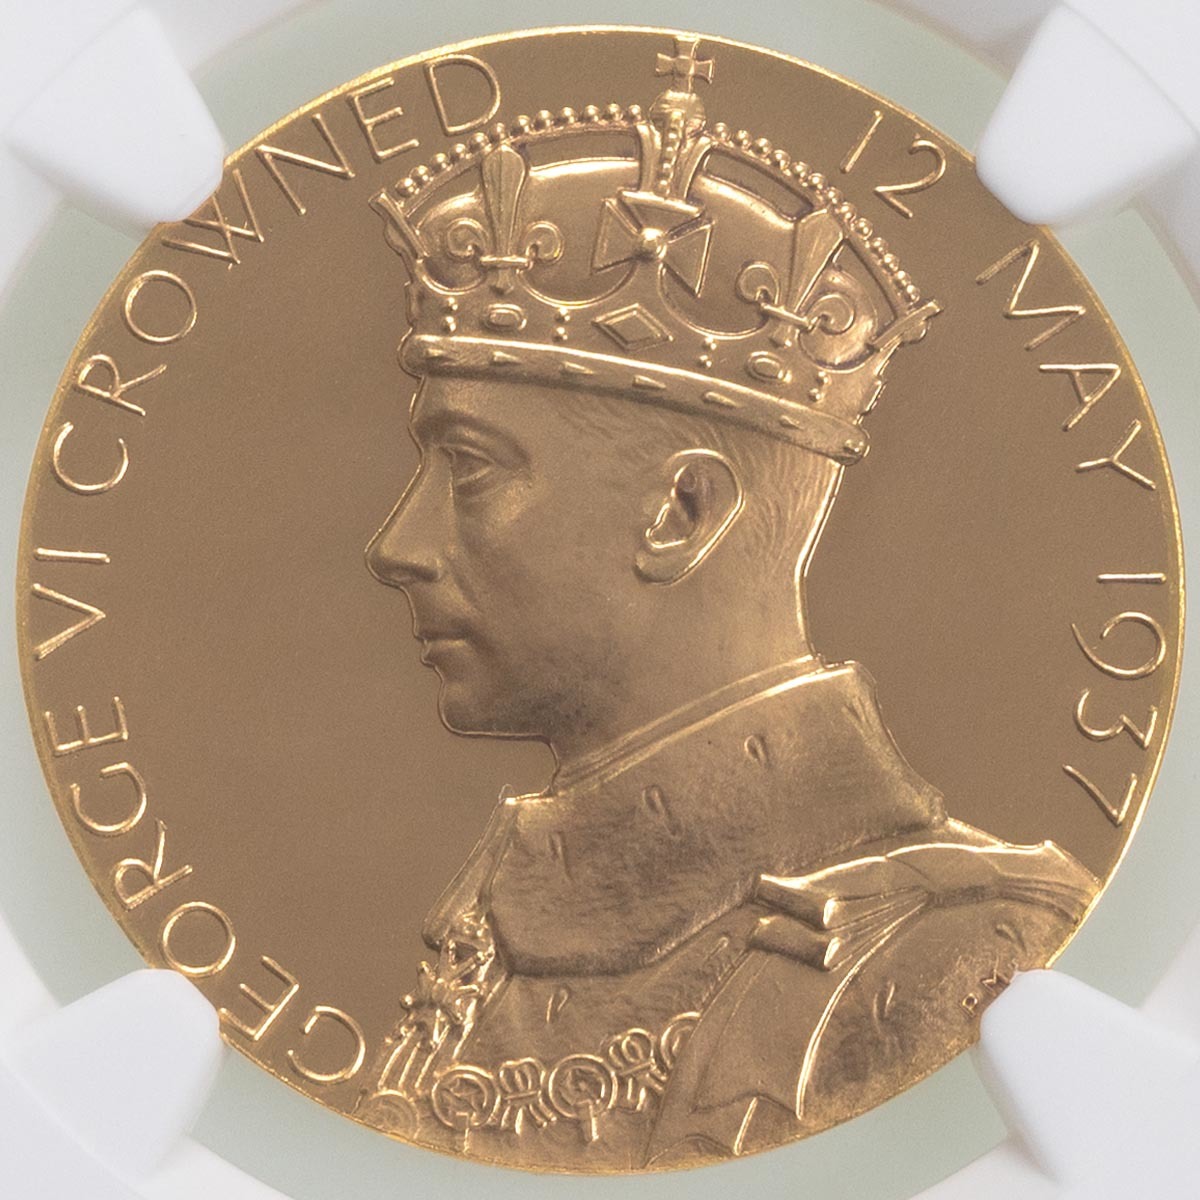 1937 King George VI Gold Coronation Medal Percy Metcalfe NGC Graded MS 65 Obverse